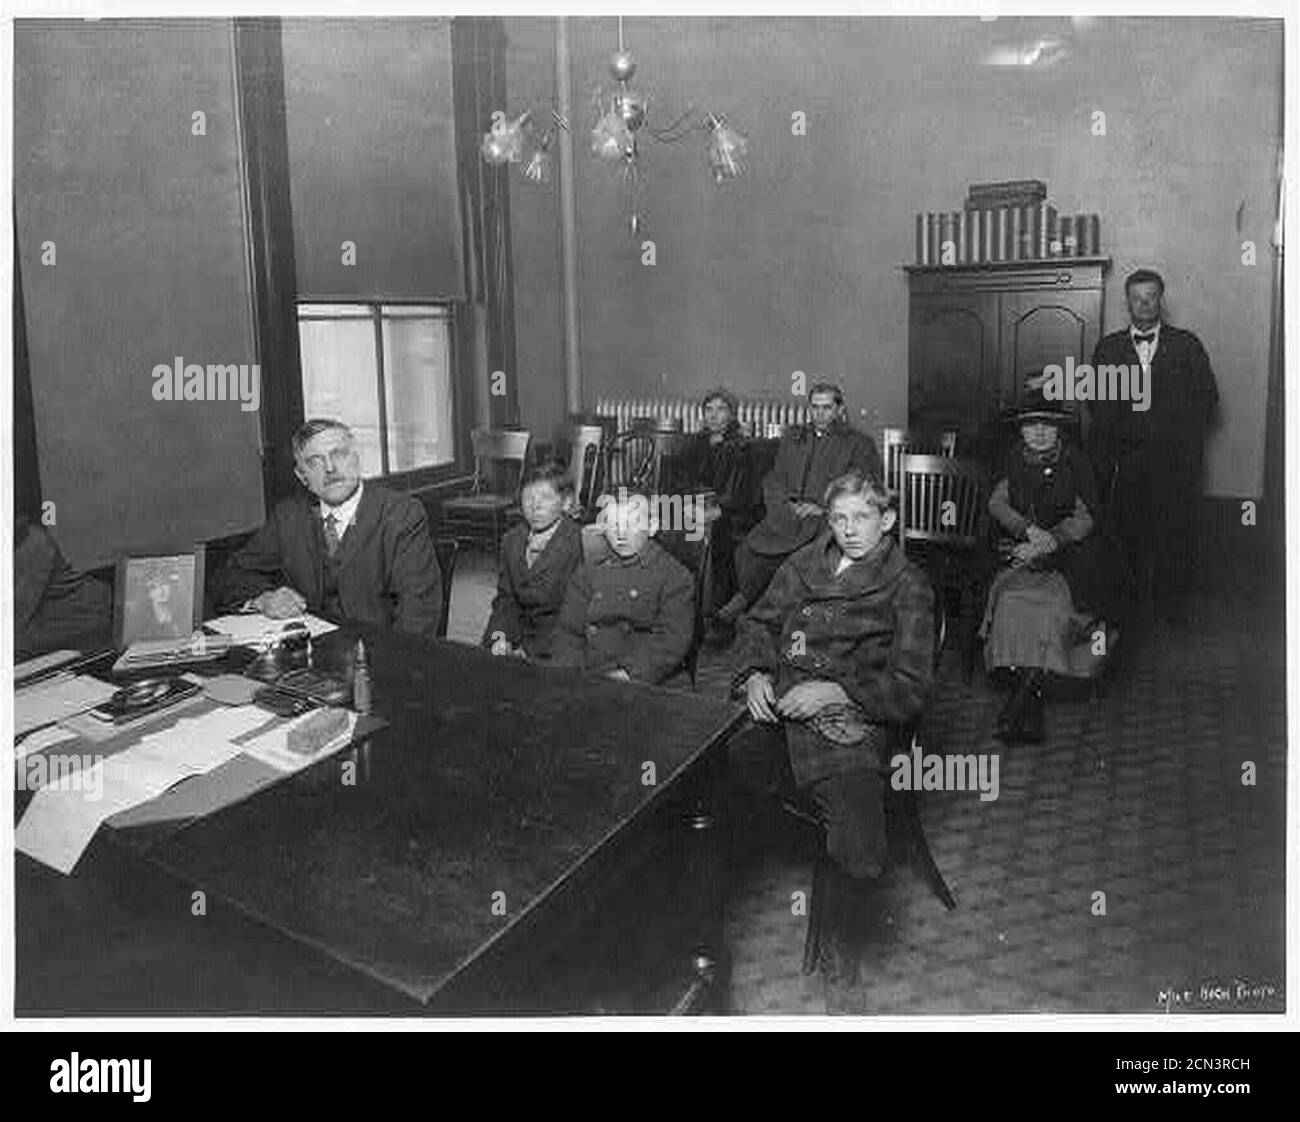 Judge Ben Lindsey's Juvenile Court chambers; 3 boys and 6 adults shown Denver Colorado Stock Photo